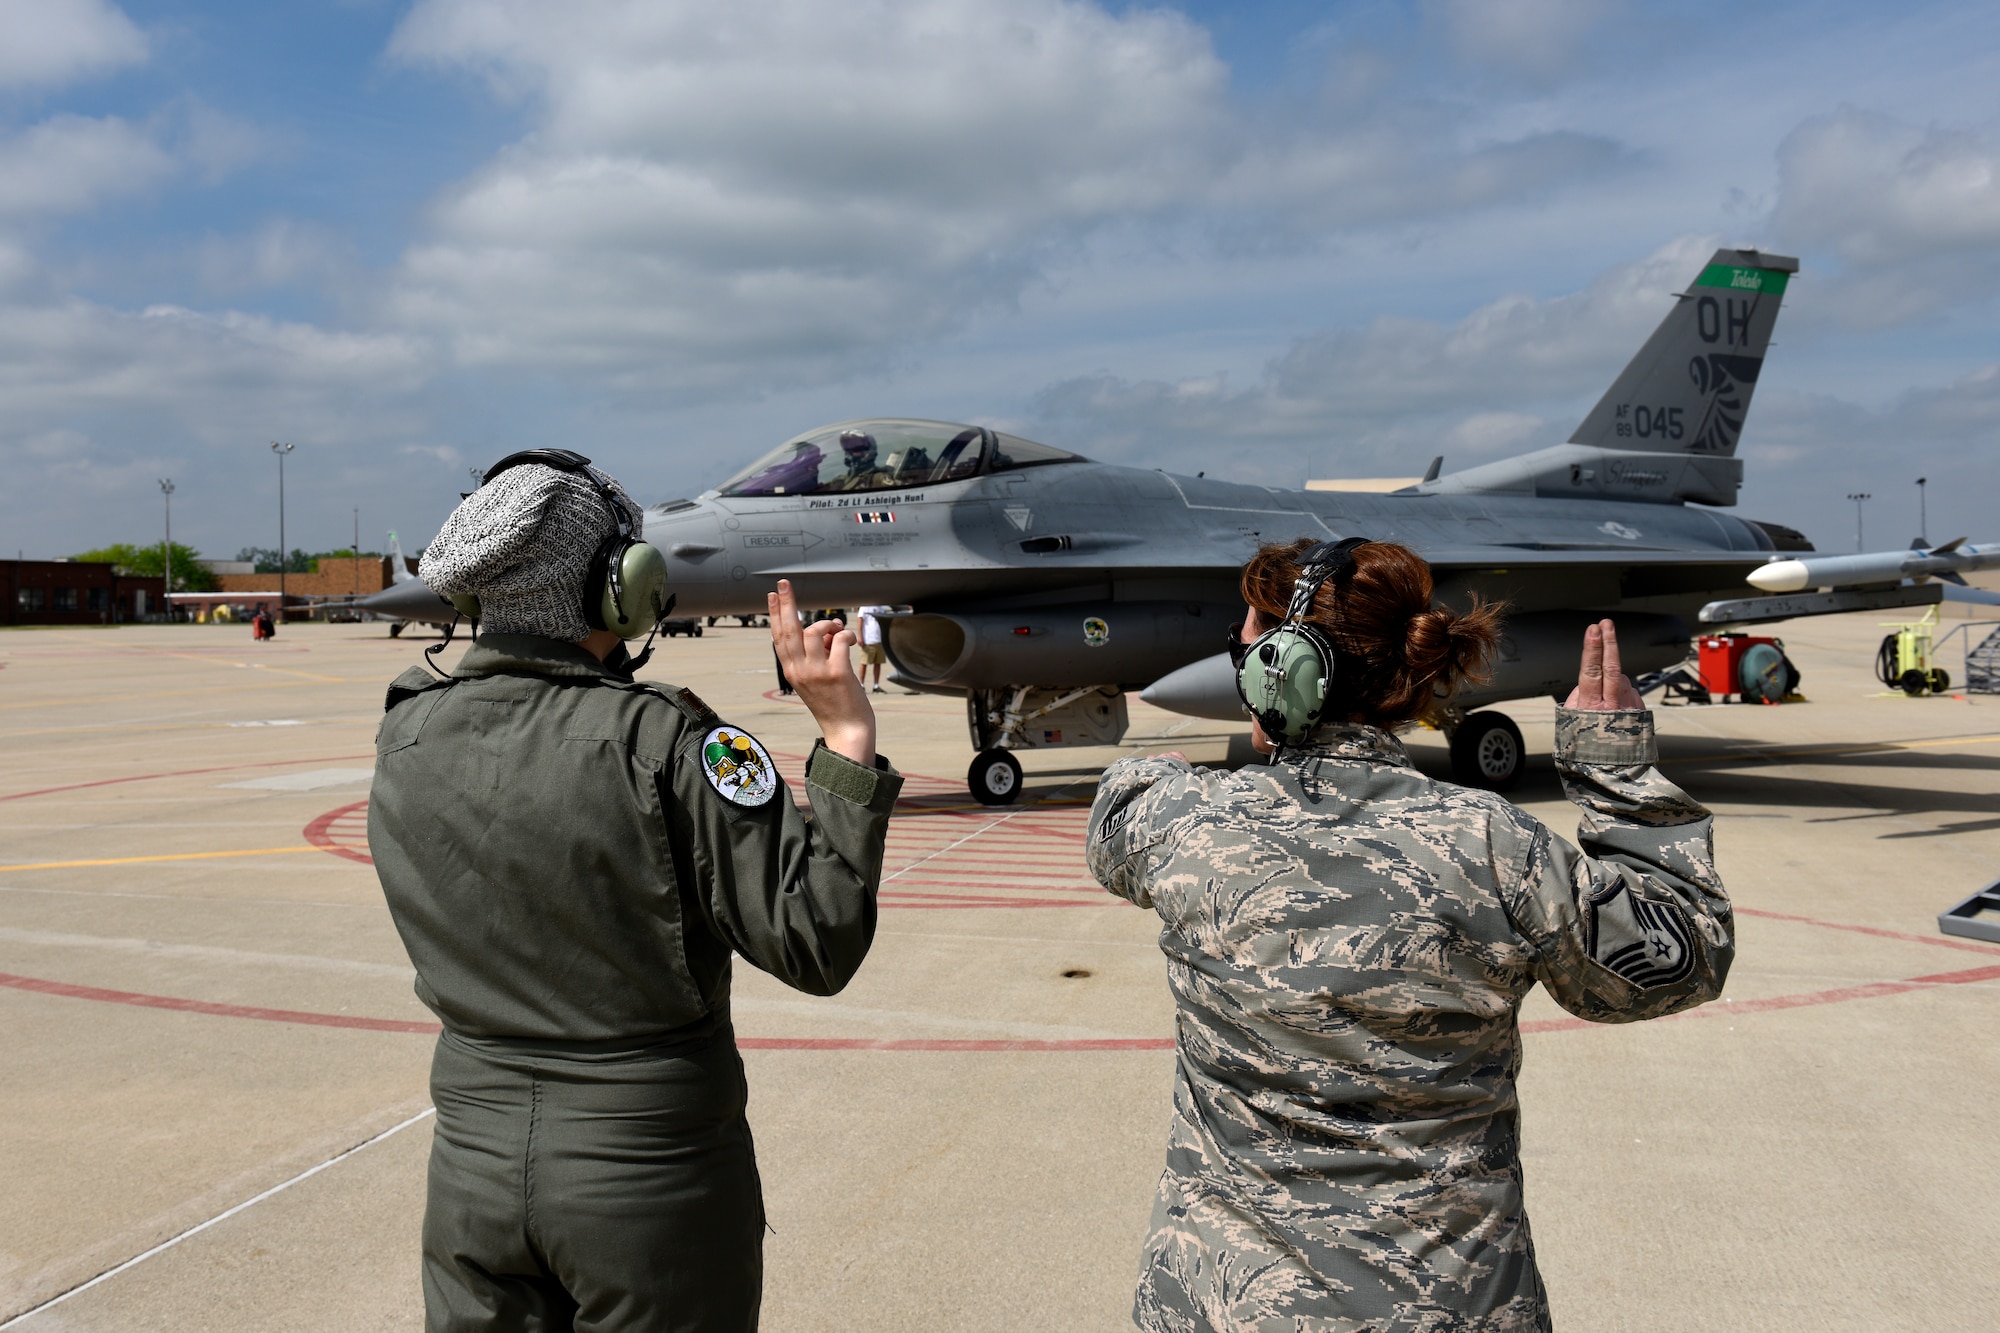 Honorary 2nd Lt. Ashleigh Hunt and U.S. Air Force Master Sgt. Kathryn L. Dorhmann, a crew chief assigned to the 180th Fighter Wing, launch an F-16 Fighting Falcon May 26, 2016 during Pilot for a Day, a program supporting children and young adults who live with chronic or life-threatening illnesses. The Pilot for a Day program allows the 180FW to give back to the local community, whose enduring support for the Airmen makes the 180FW mission possible. (U.S. Air National Guard photo by Staff Sgt. Shane Hughes)